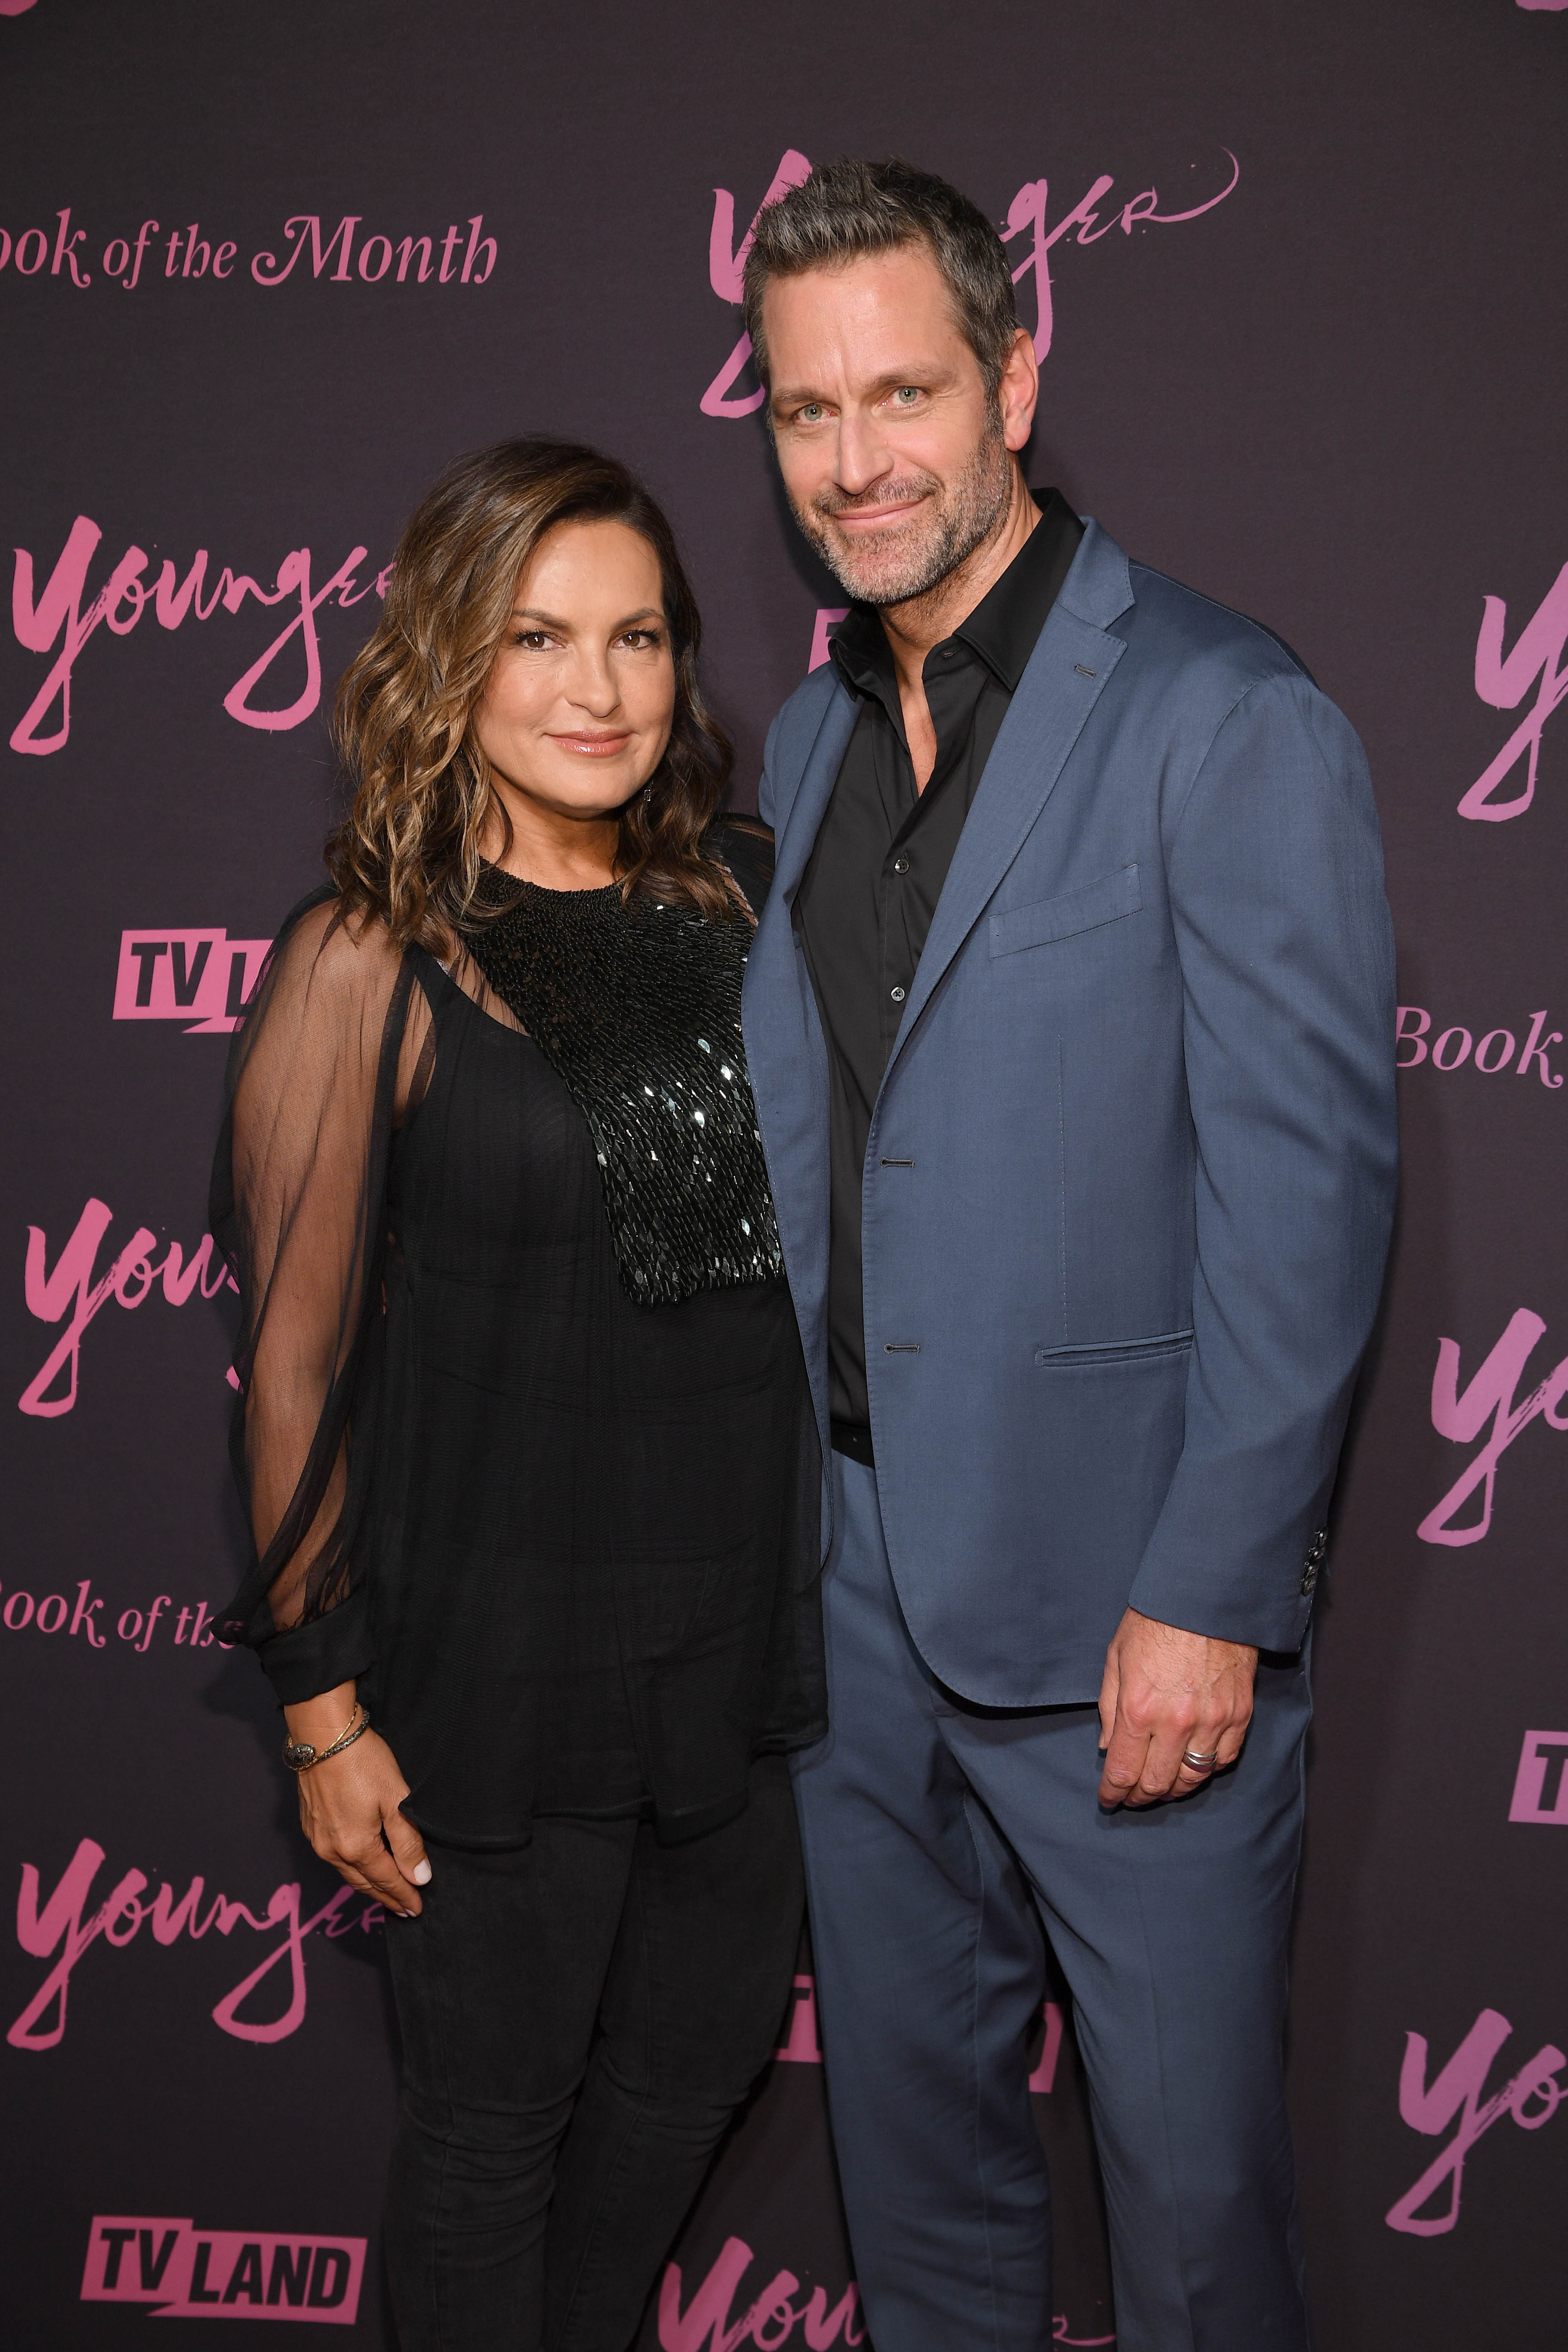 Mariska Hargitay and Peter Hermann pose for photo together on the carpet at Younger Season 6 premiere